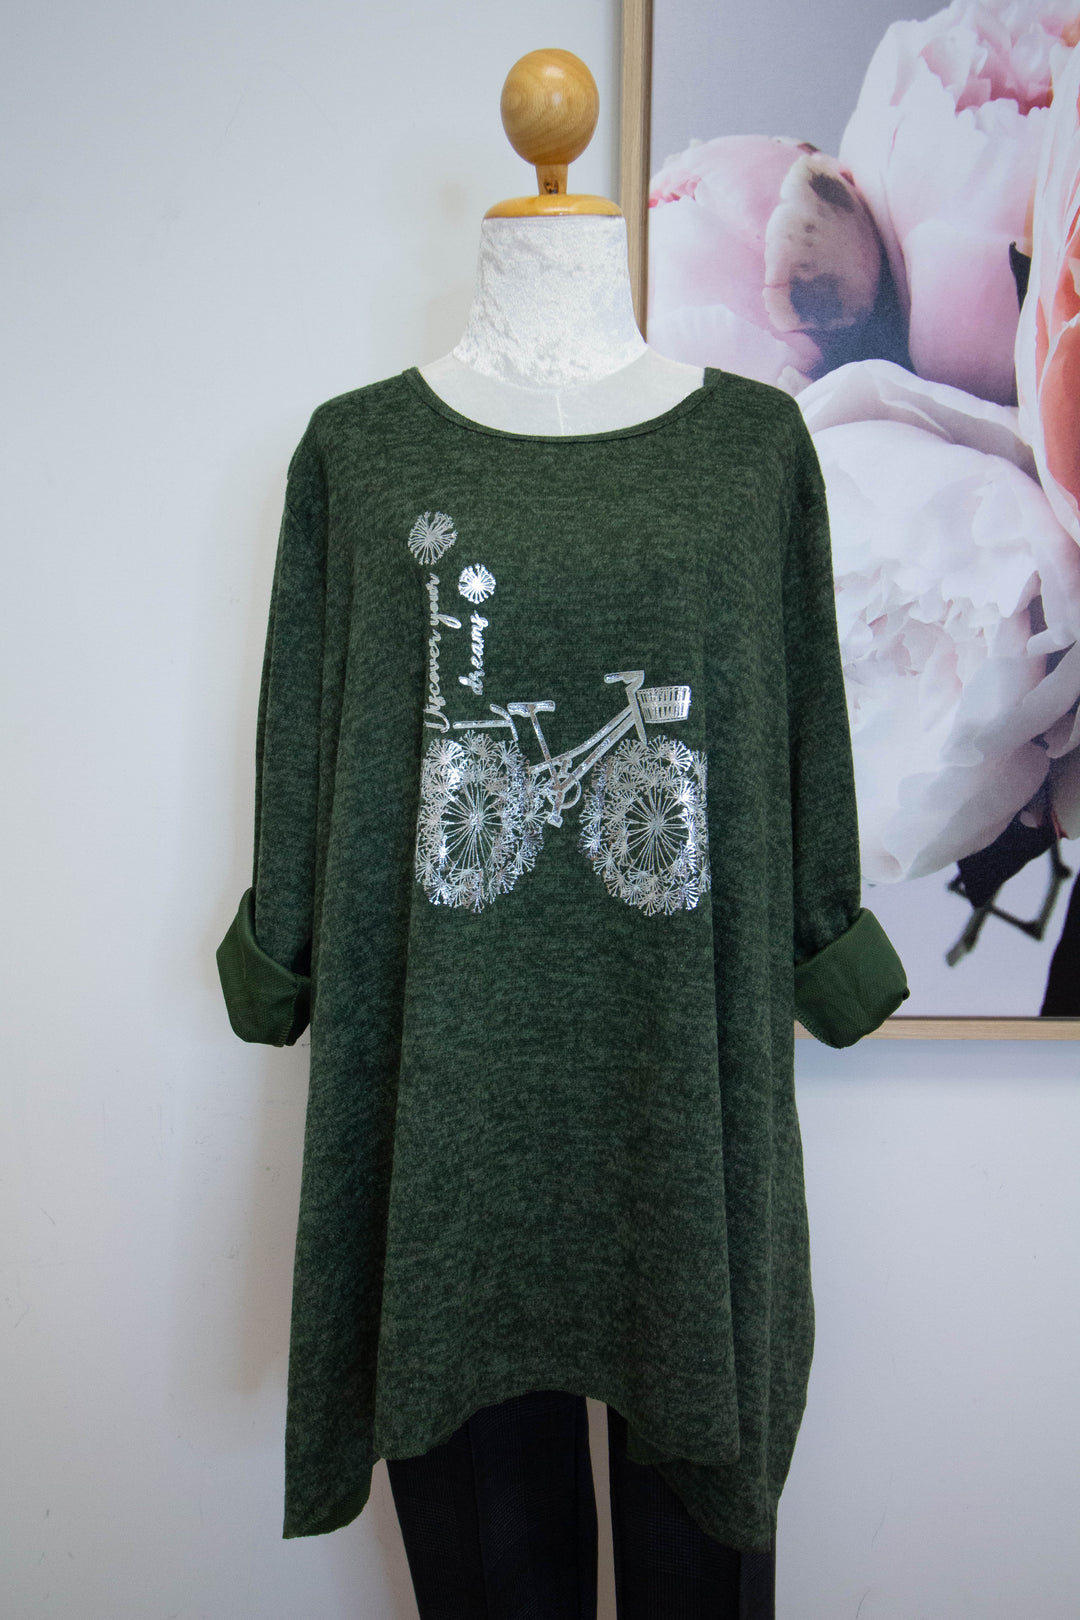 Italian jumper - Bicycle top - Green - front